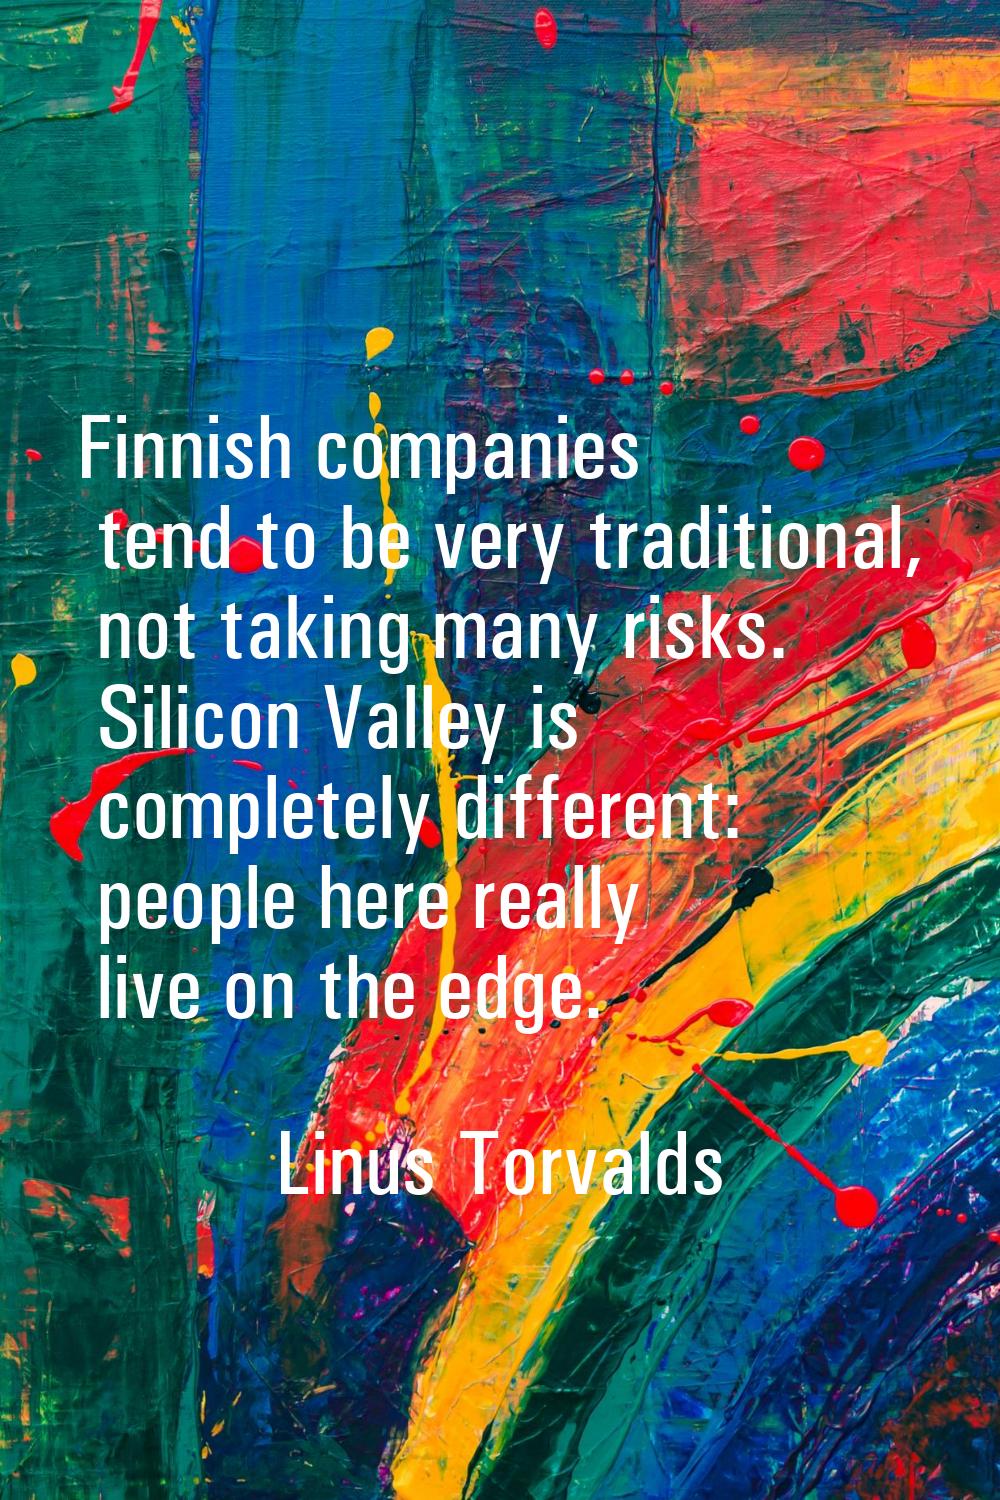 Finnish companies tend to be very traditional, not taking many risks. Silicon Valley is completely 